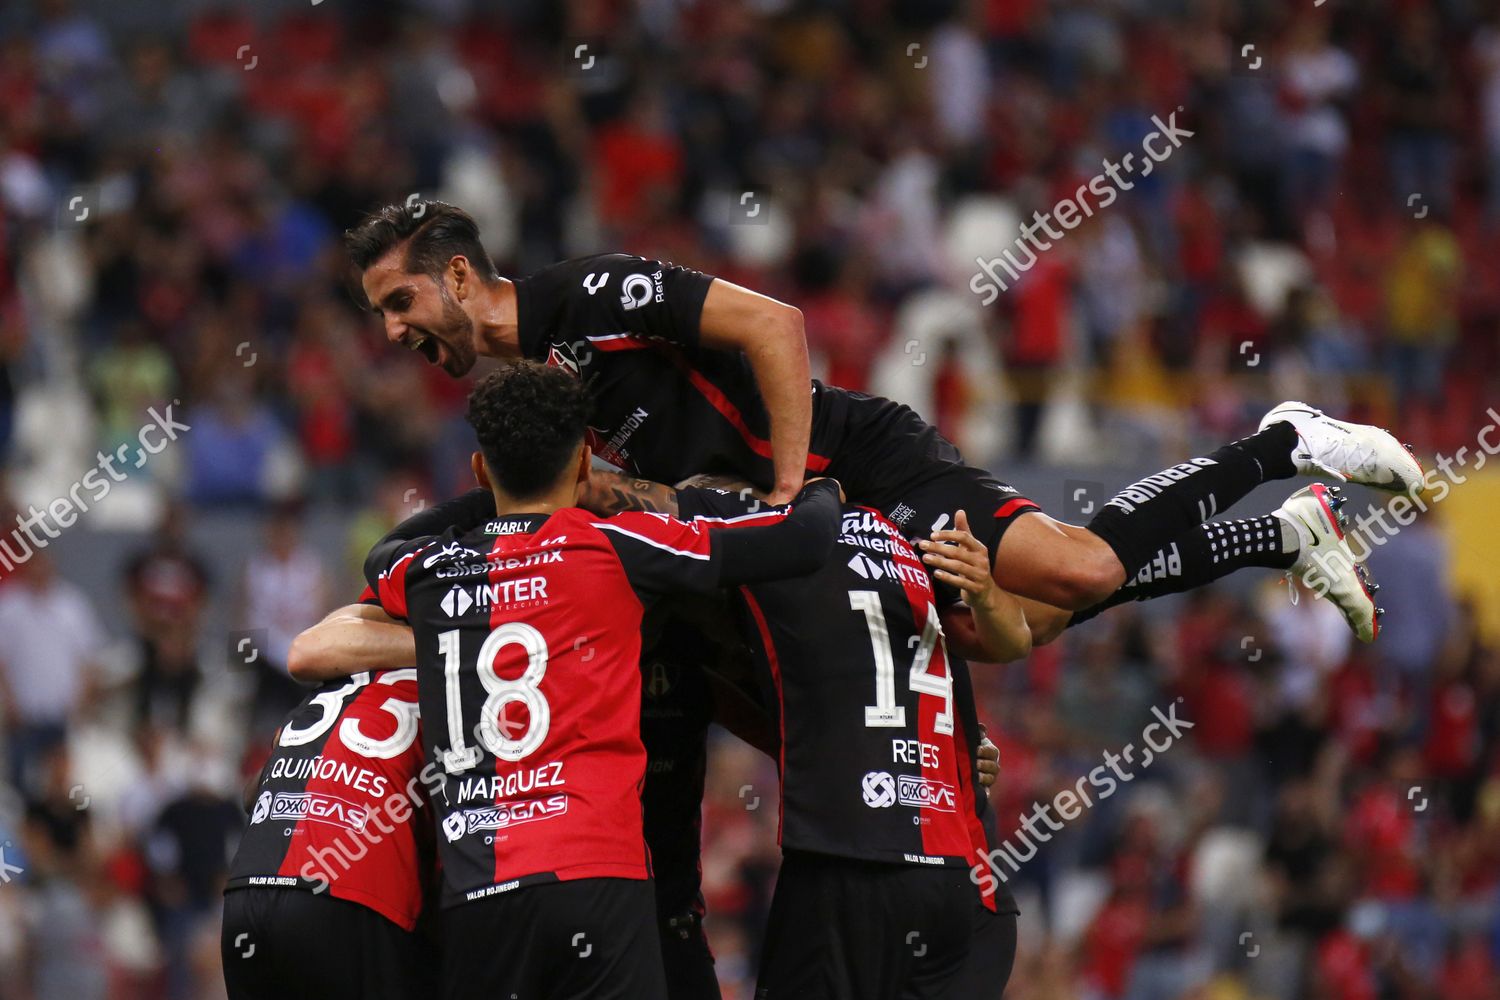 ATLAS' PLAYERS CELEBRATE AFTER SCORING AGAINST Editorial Stock Photo